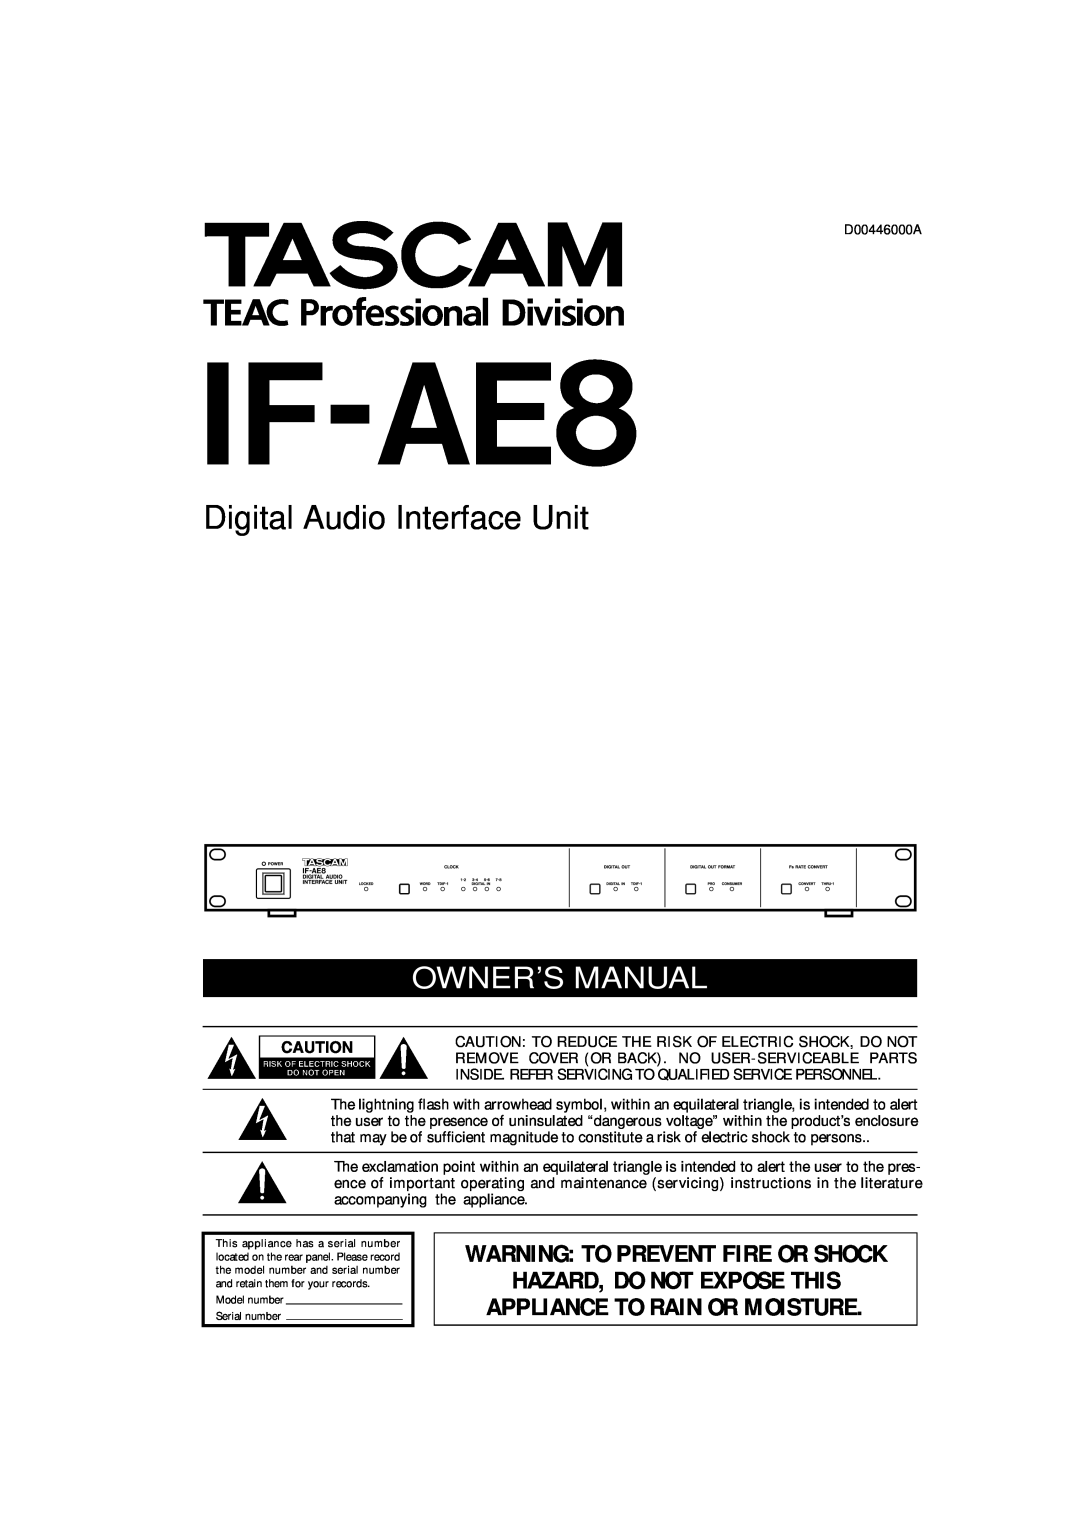 Tascam IF-AE8 owner manual Digital Audio Interface Unit, Hazard, Do Not Expose This, Appliance To Rain Or Moisture 